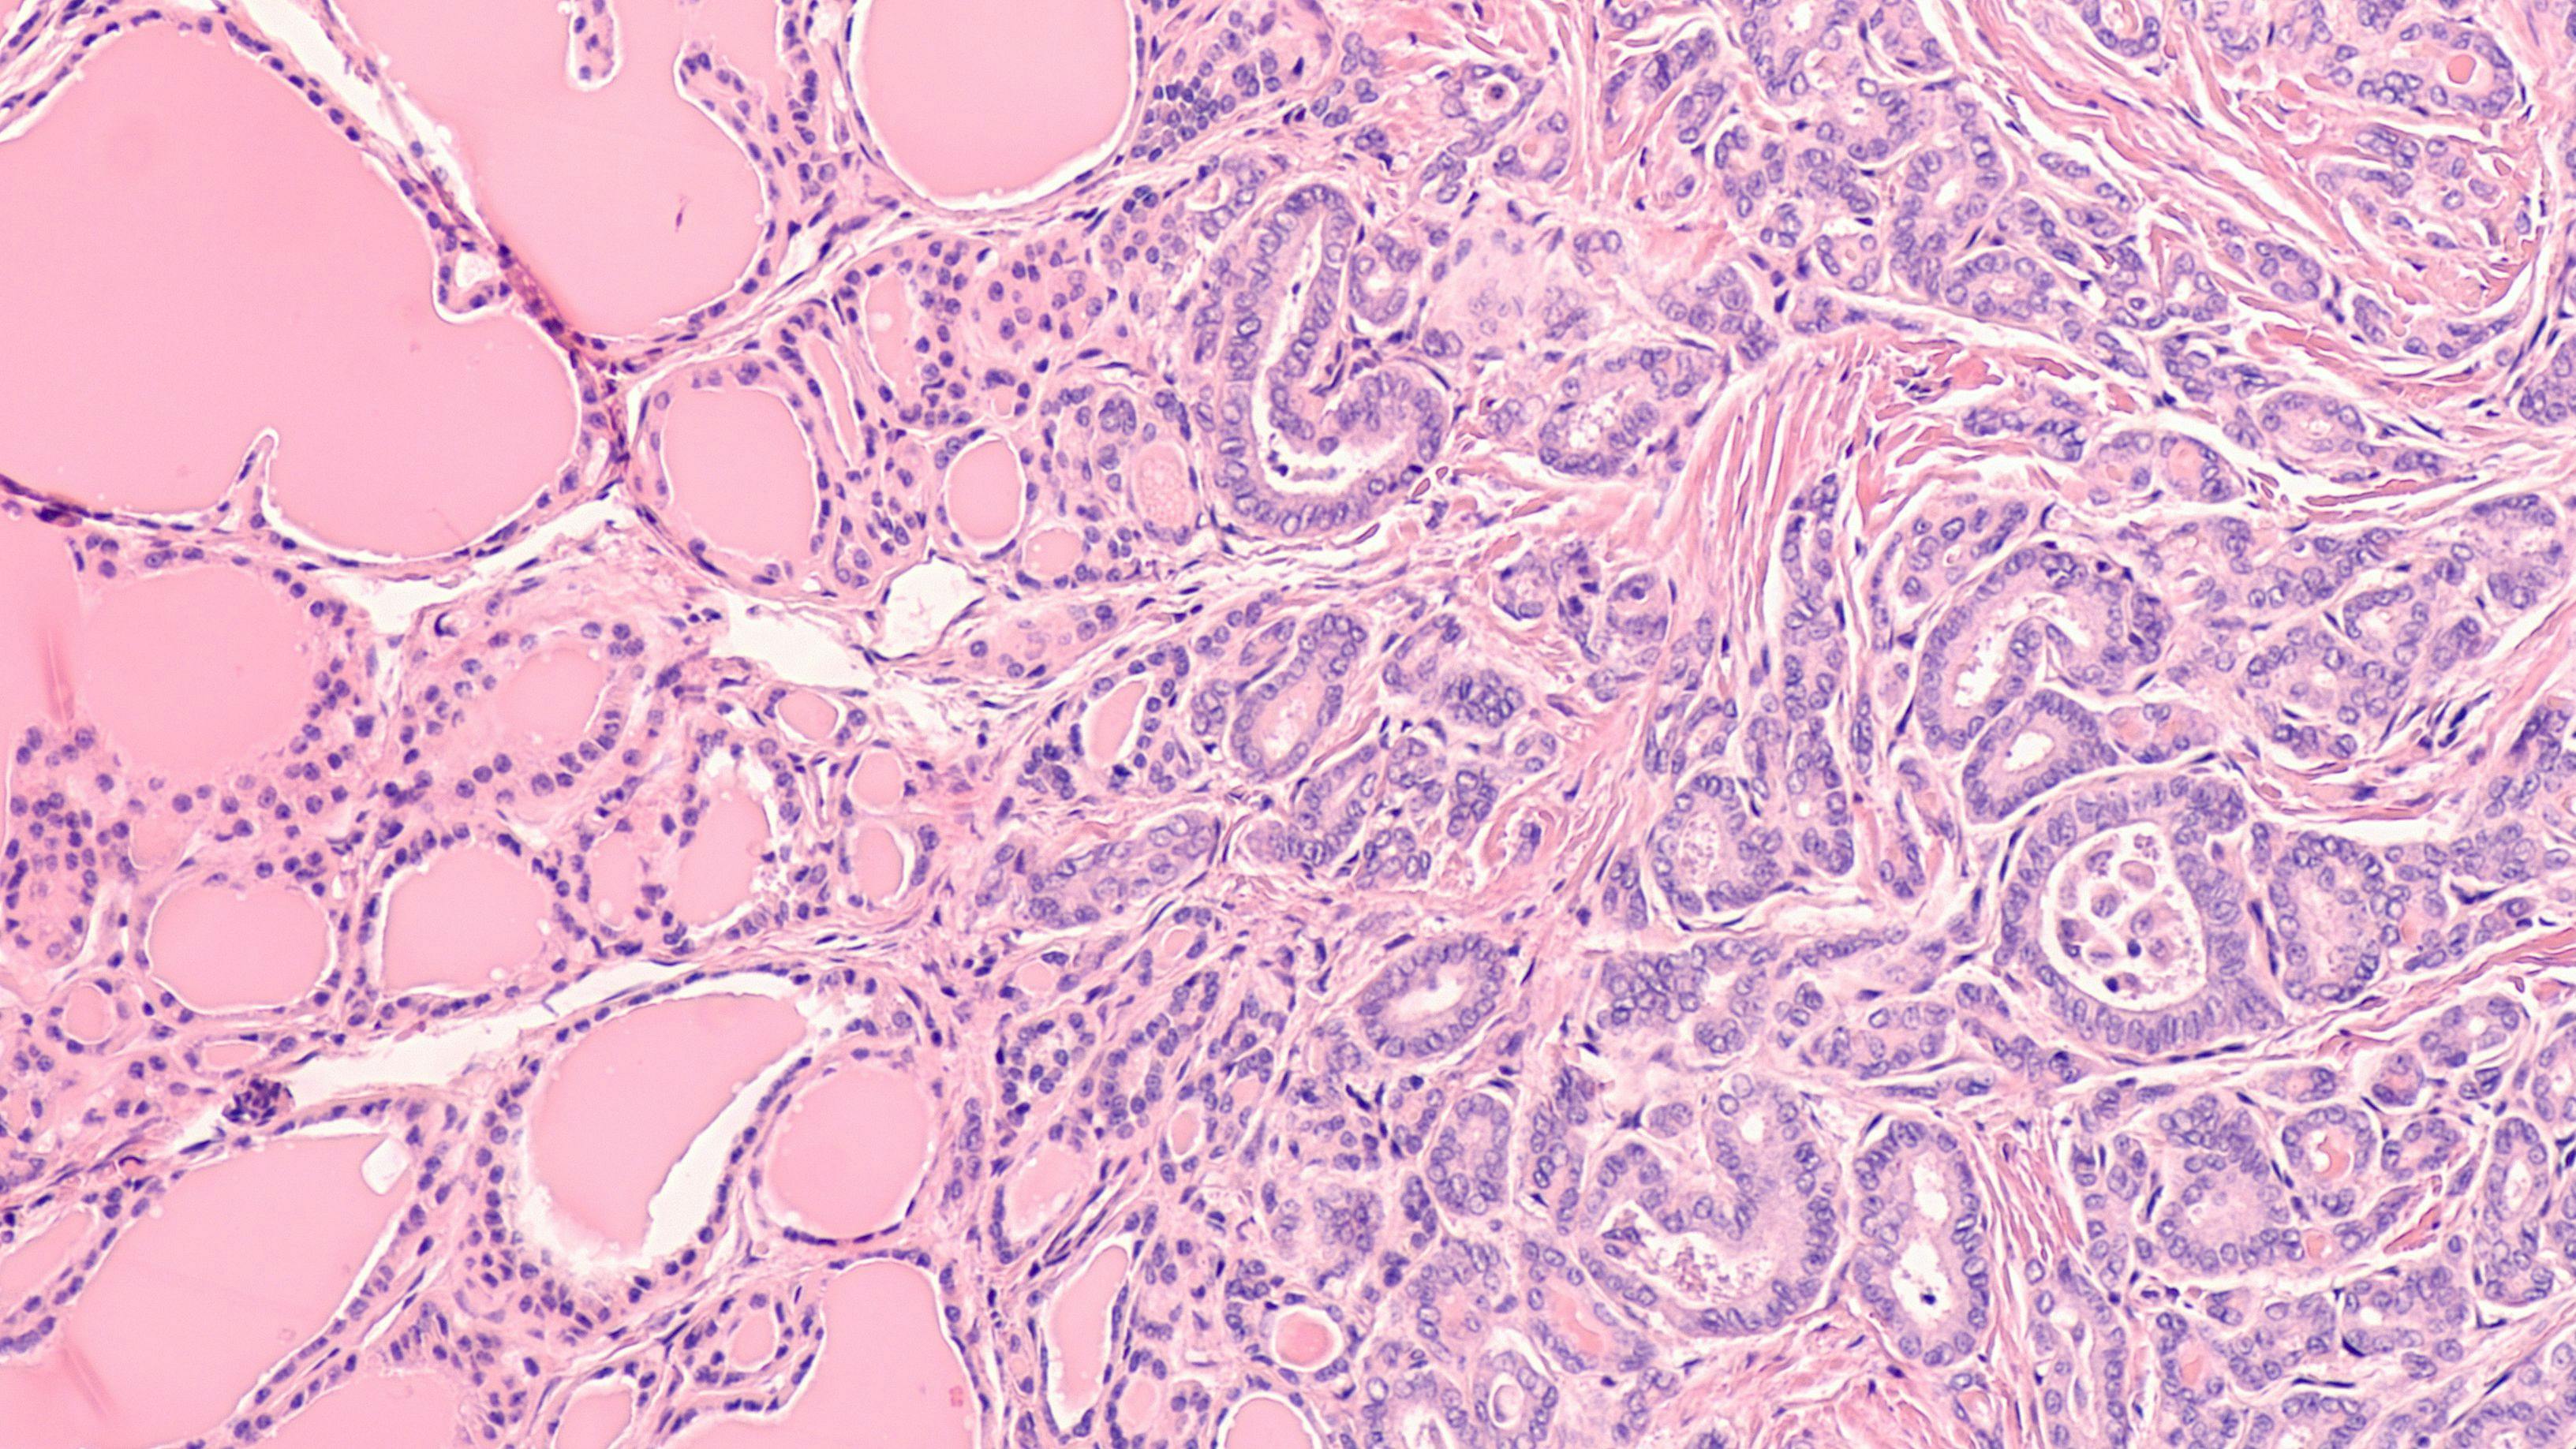 Thyroid gland cancer awareness: Microscopic image of papillary thyroid carcinoma, follicular variant (left), with invasion into benign follicles or normal thyroid tissue (right). | Image Credit: © David A Litman - stock.adobe.com